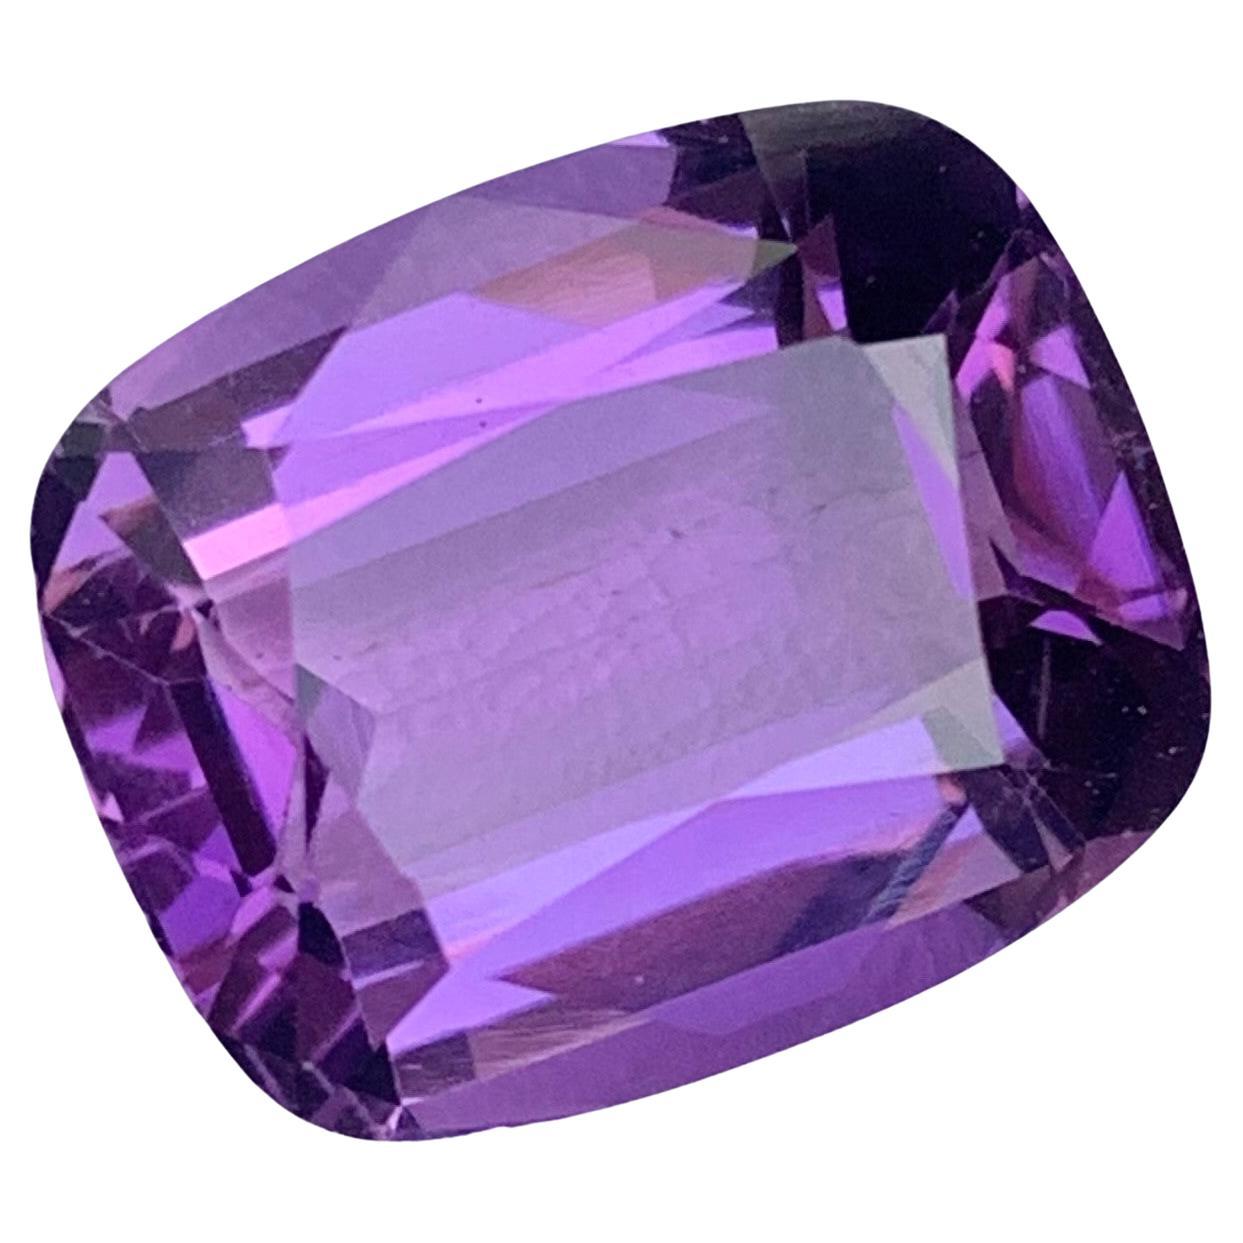 Gorgeous 9.10 Carat Natural Loose Purple Amethyst Gemstone from Brazil For Sale